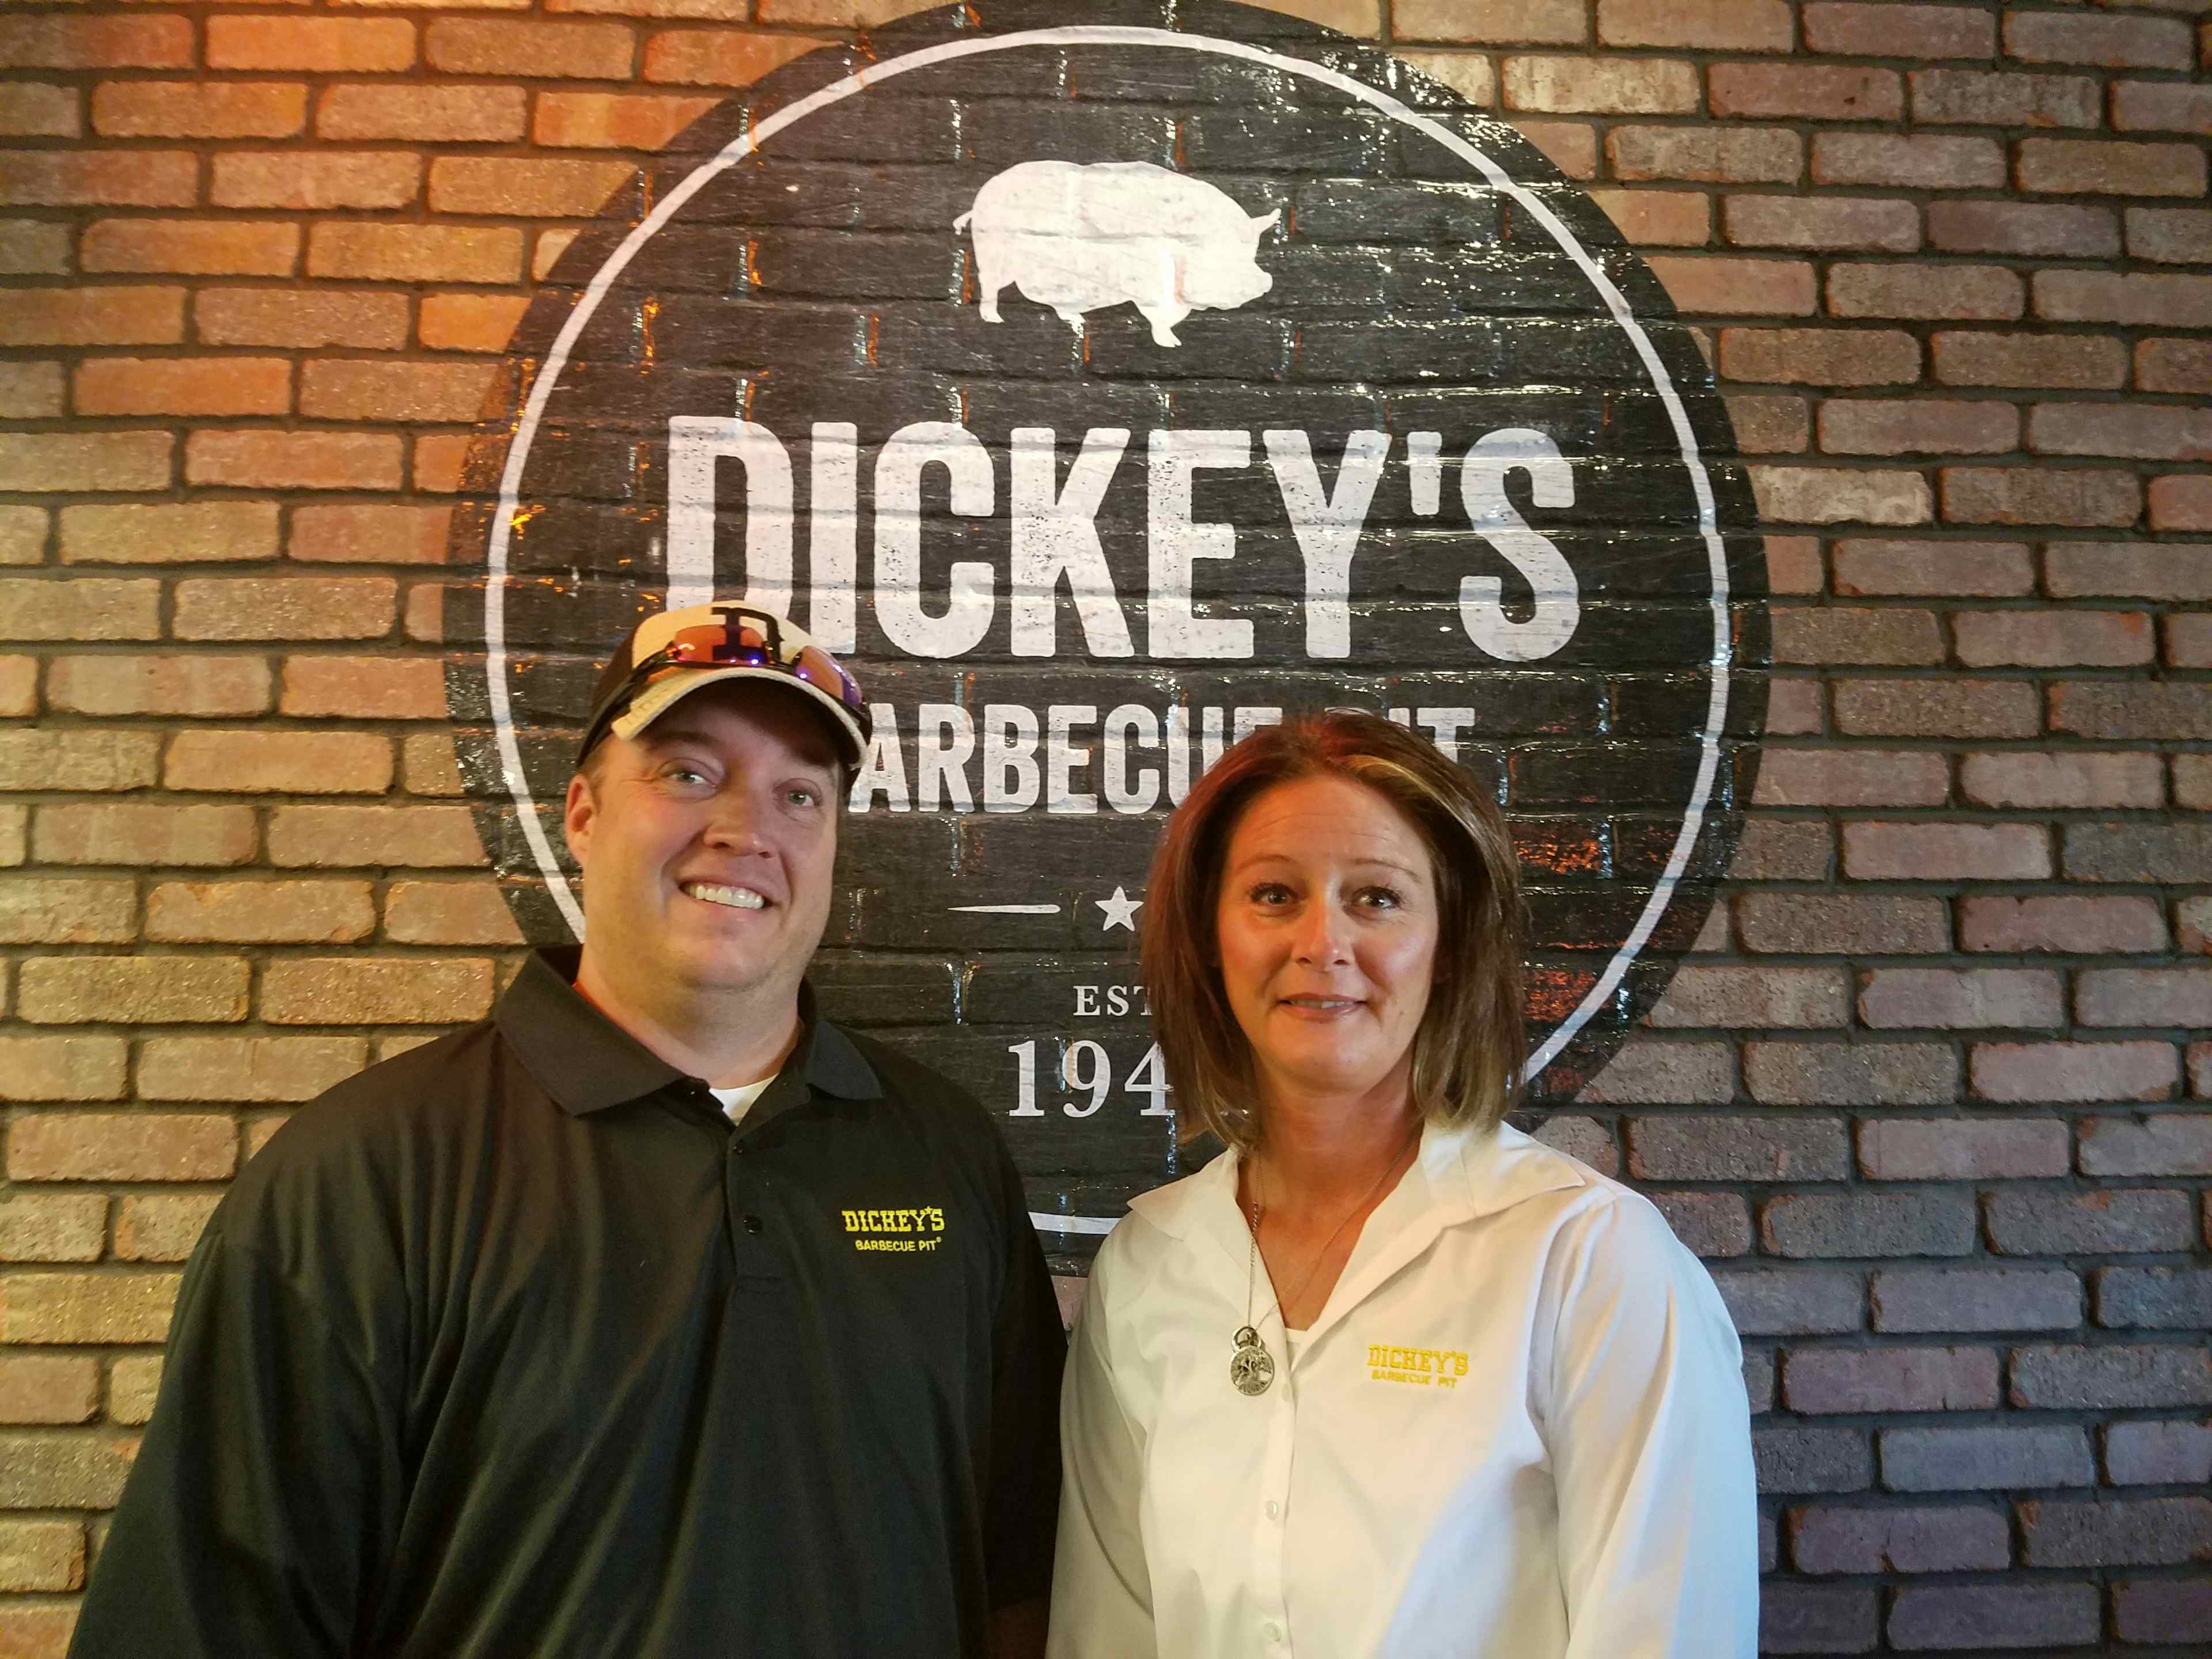 Dickey’s Barbecue Pit Brings Authentic, Slow-smoked Barbecue To Brighton